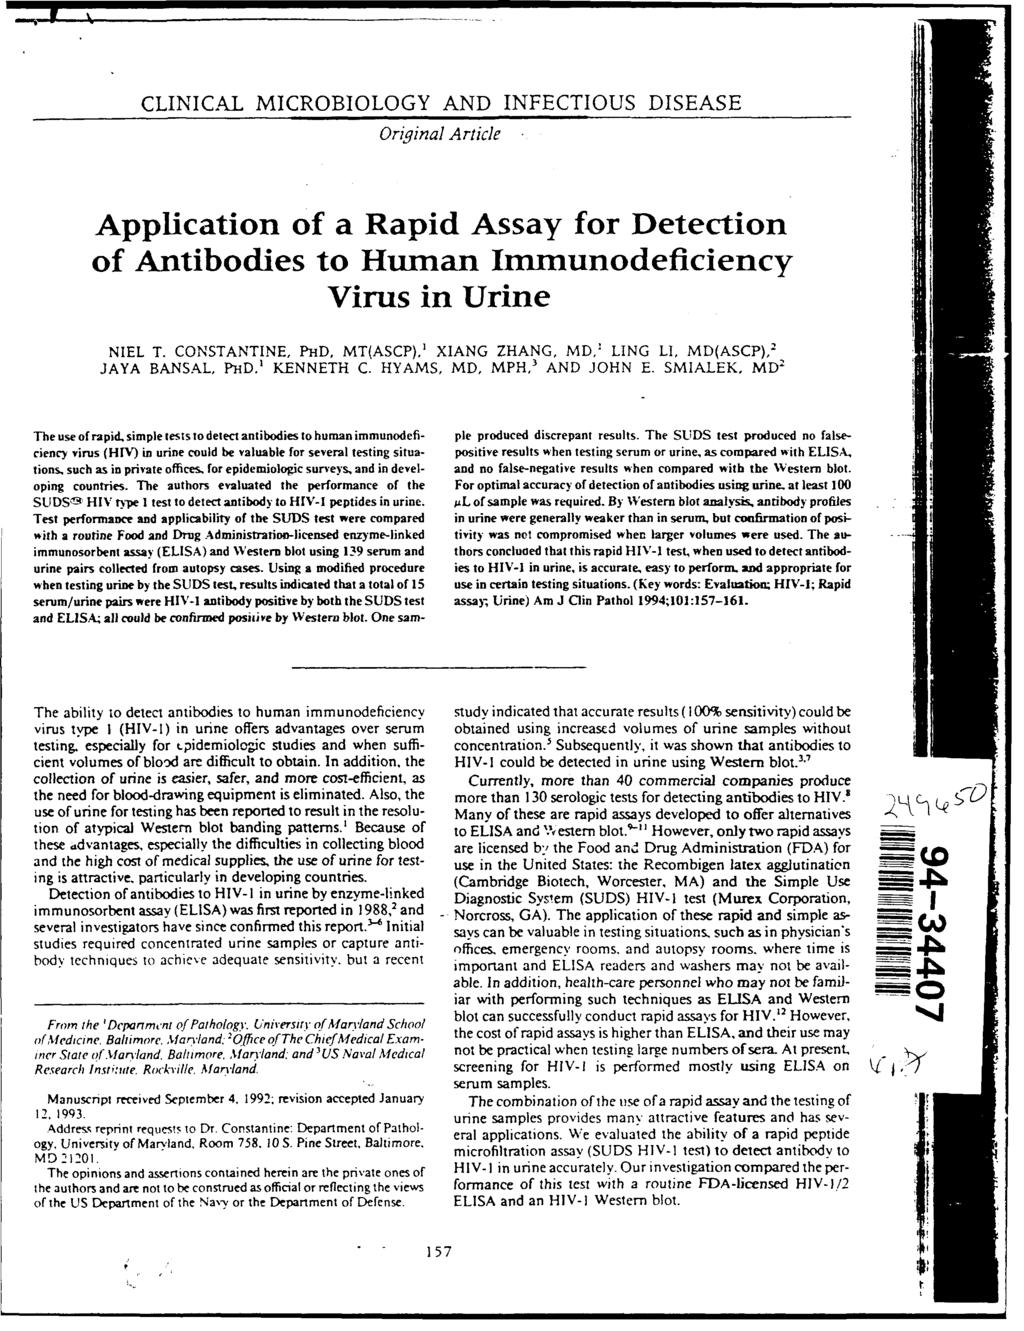 CLINICAL MICROBIOLOGY AND INFECTIOUS DISEASE Original Article Application of a Rapid Assay for Detection of Antibodies to Human Immunodeficiency Virus in Urine NIEL T.